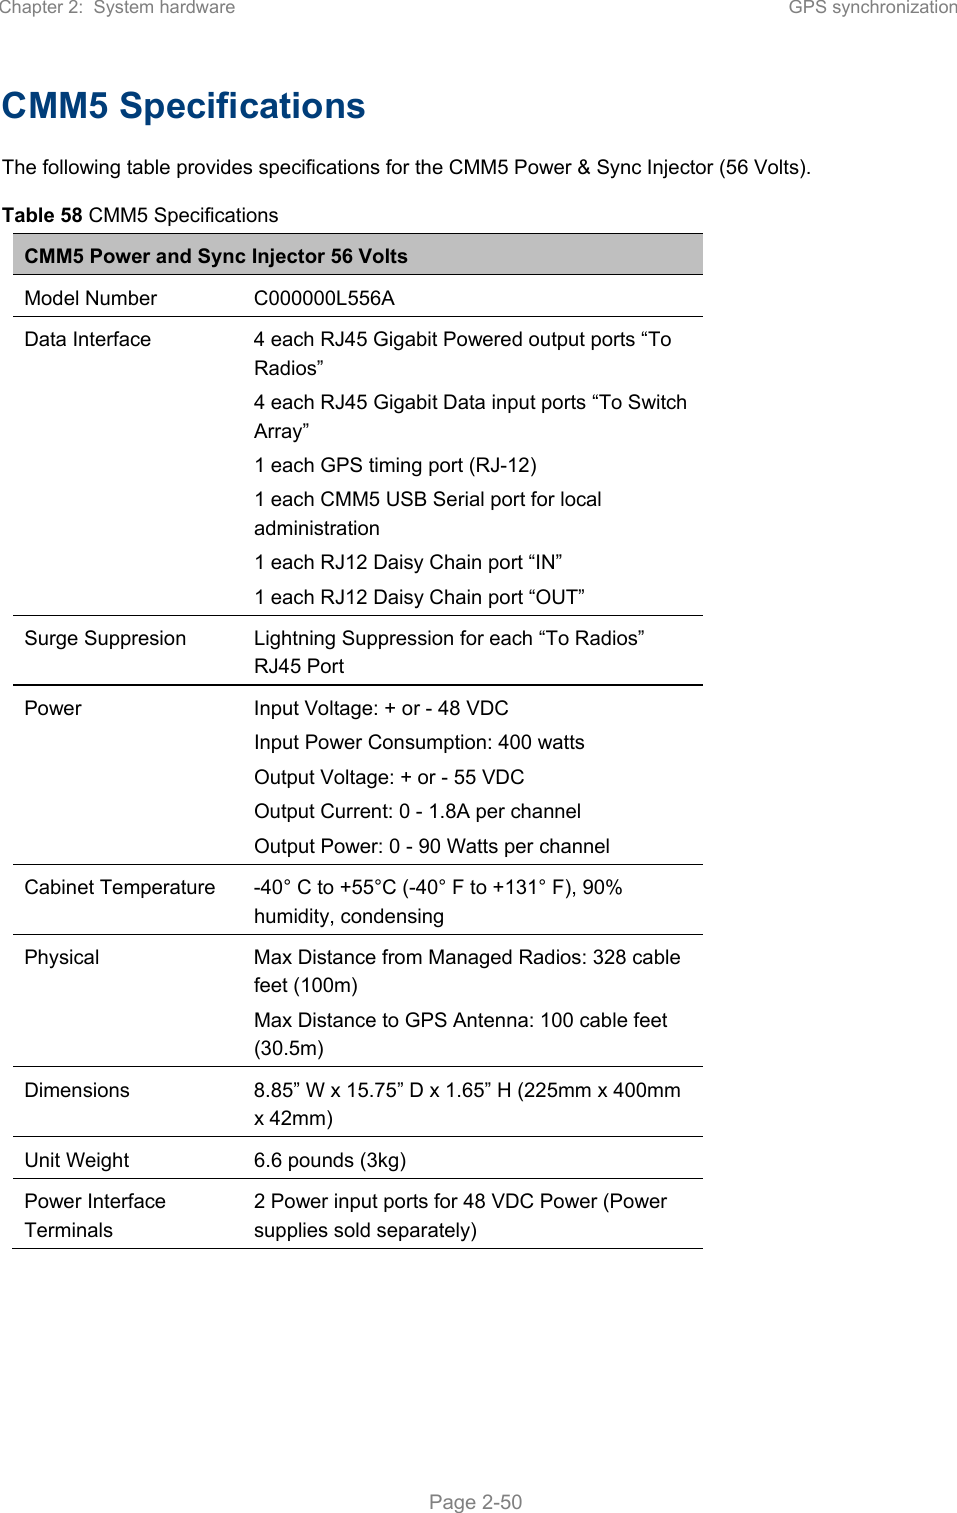 Chapter 2:  System hardware  GPS synchronization   Page 2-50 CMM5 Specifications The following table provides specifications for the CMM5 Power &amp; Sync Injector (56 Volts). Table 58 CMM5 Specifications CMM5 Power and Sync Injector 56 Volts Model Number  C000000L556A Data Interface  4 each RJ45 Gigabit Powered output ports “To Radios” 4 each RJ45 Gigabit Data input ports “To Switch Array” 1 each GPS timing port (RJ-12) 1 each CMM5 USB Serial port for local administration 1 each RJ12 Daisy Chain port “IN” 1 each RJ12 Daisy Chain port “OUT” Surge Suppresion  Lightning Suppression for each “To Radios” RJ45 Port Power  Input Voltage: + or - 48 VDC Input Power Consumption: 400 watts Output Voltage: + or - 55 VDC Output Current: 0 - 1.8A per channel Output Power: 0 - 90 Watts per channel Cabinet Temperature  -40° C to +55°C (-40° F to +131° F), 90% humidity, condensing Physical  Max Distance from Managed Radios: 328 cable feet (100m) Max Distance to GPS Antenna: 100 cable feet (30.5m) Dimensions  8.85” W x 15.75” D x 1.65” H (225mm x 400mm x 42mm) Unit Weight  6.6 pounds (3kg) Power Interface Terminals 2 Power input ports for 48 VDC Power (Power supplies sold separately)    